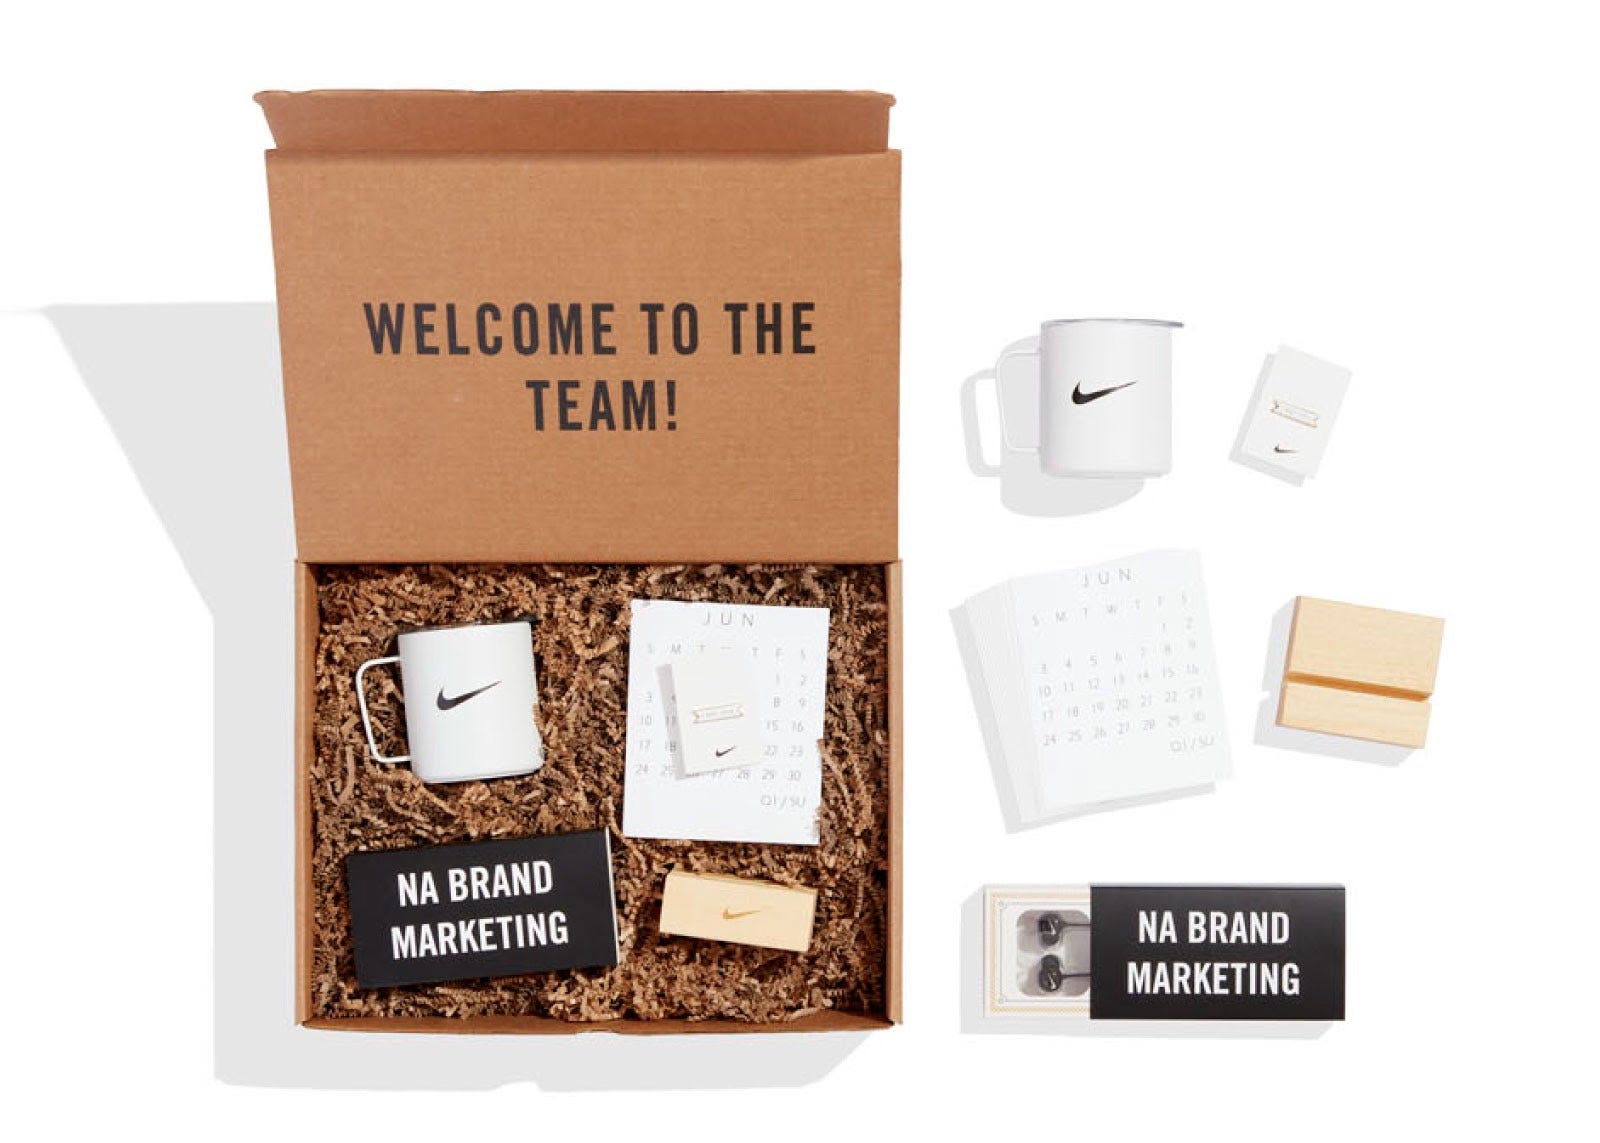 The First Day Of Work Welcome Kits At Nike Salesforce Ibm Sega Digitalocean Boxed Branch Coinbase Ogilvy Mather And Similiarweb By Vladimir Polo Hackernoon Com Medium